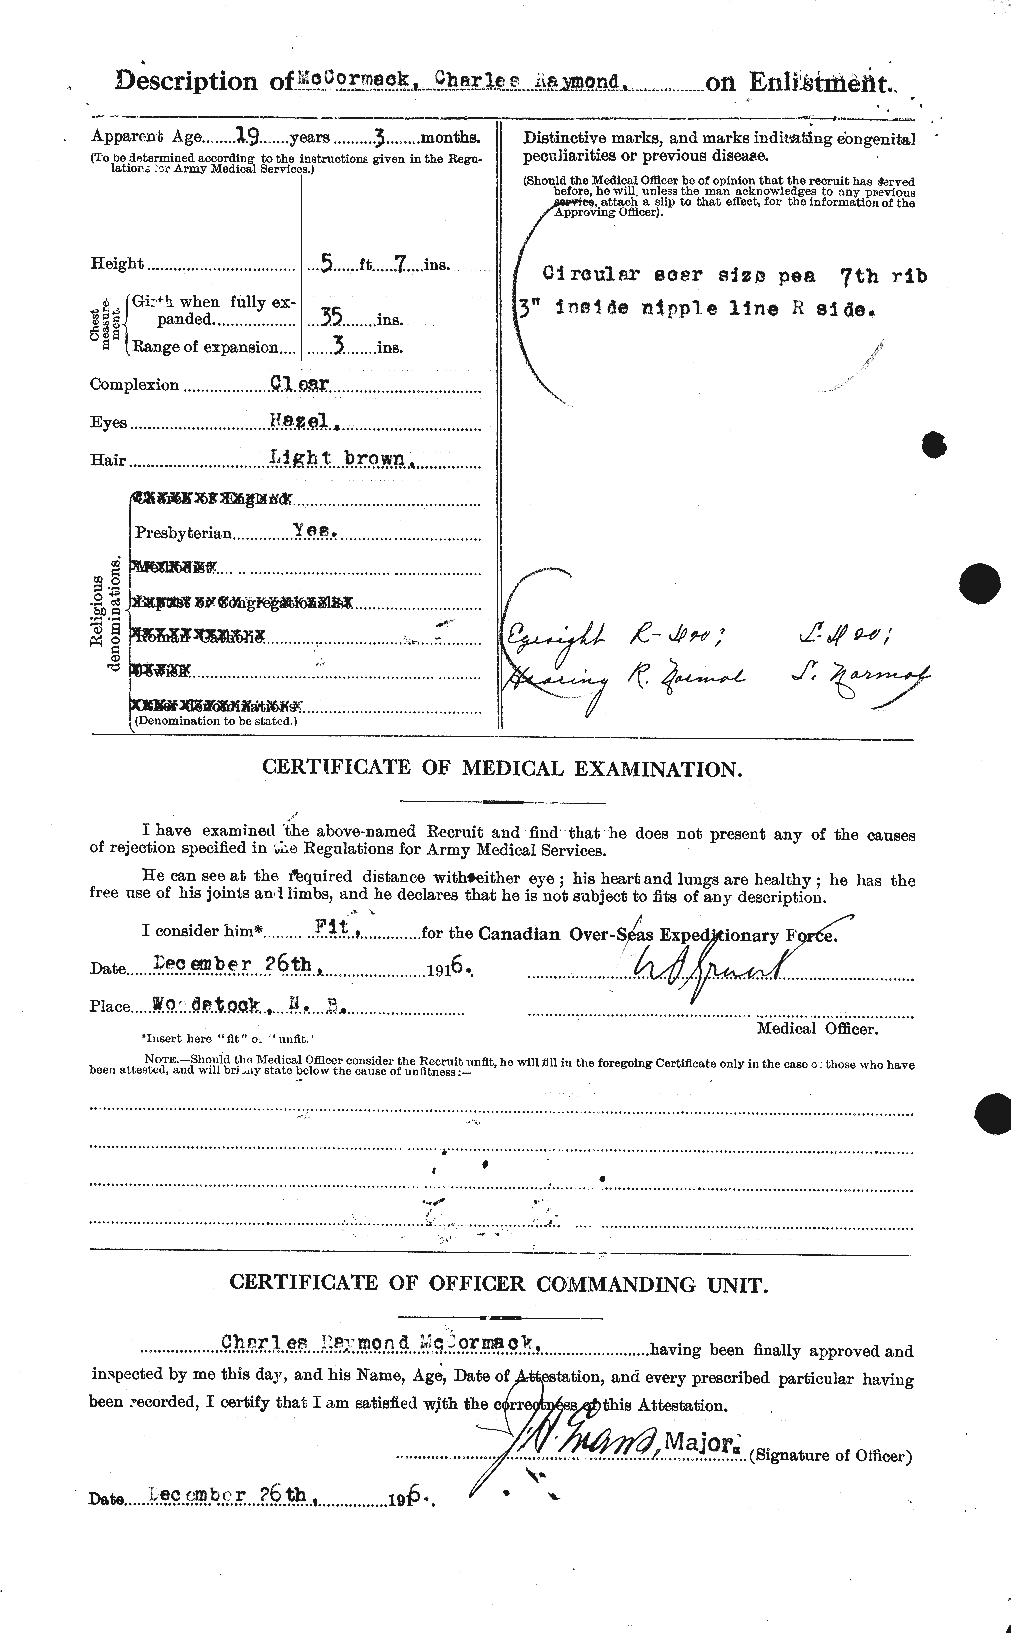 Personnel Records of the First World War - CEF 134069b